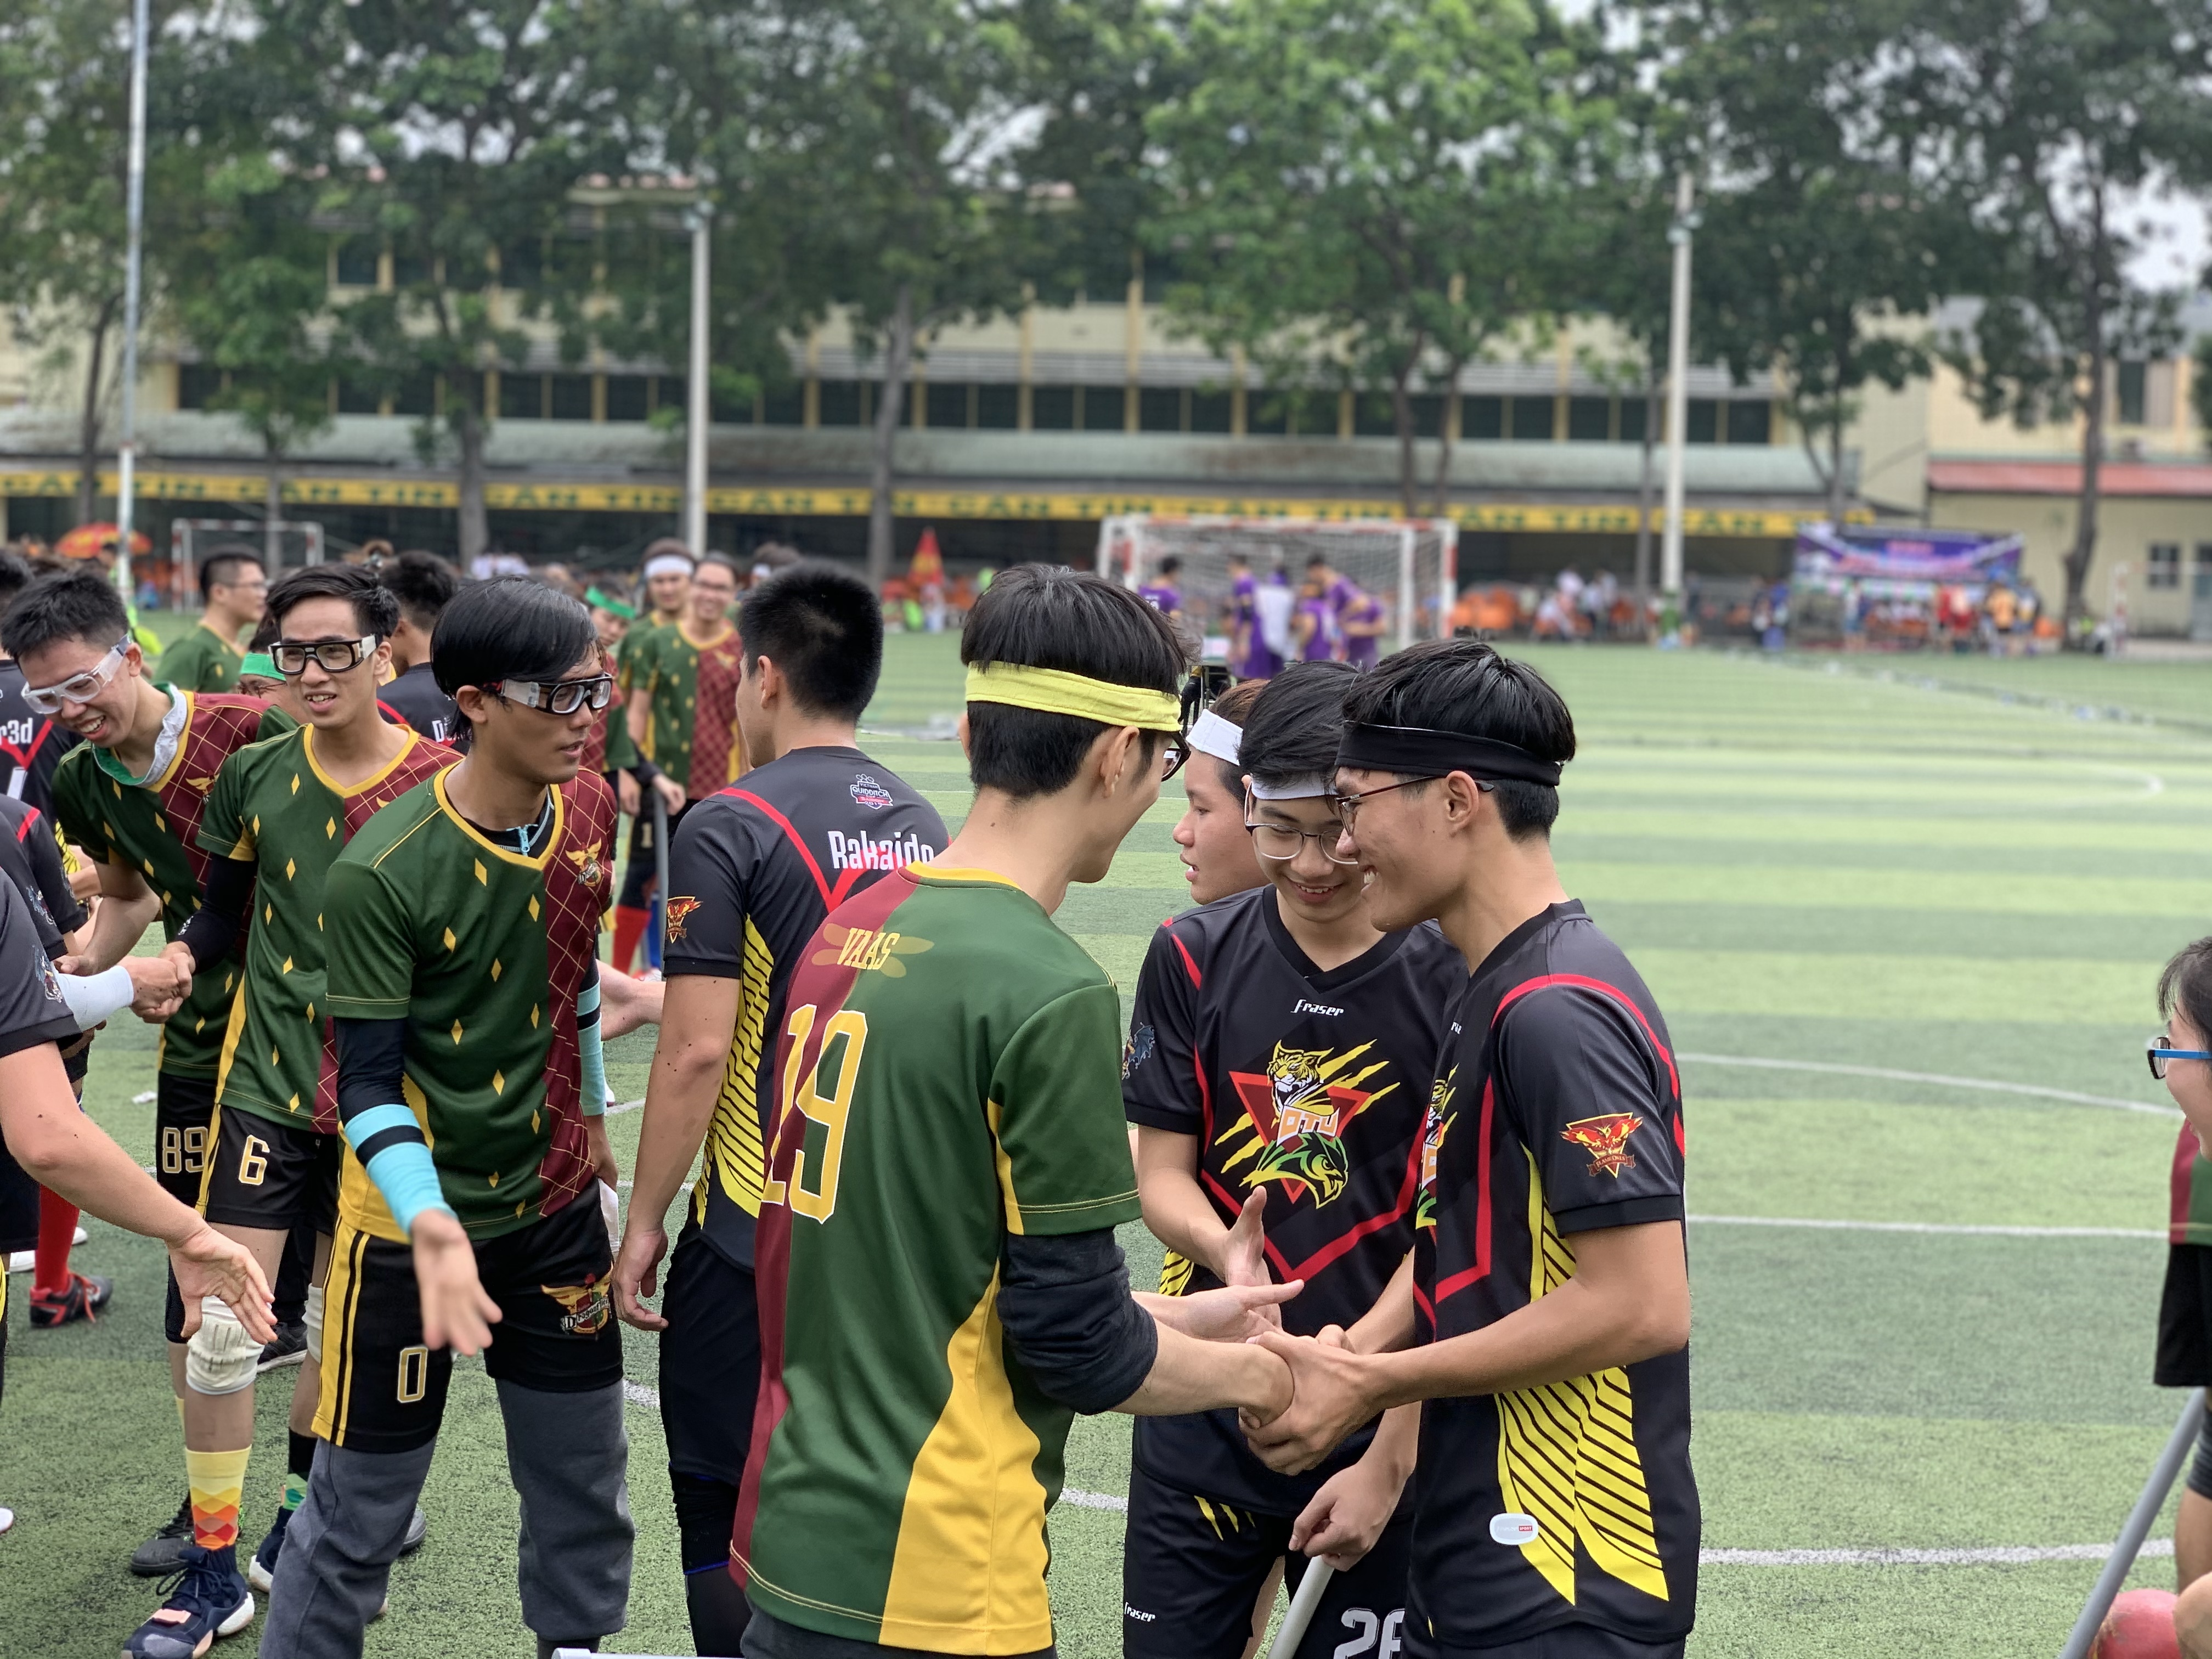 Players shake hand after a match in the maiden Vietnam Quidditch Cup organized by the Vietnam Quidditch Association  in Tan Binh District, Ho Chi Minh City, November 10, 2019. Photo: Bao Anh / Tuoi Tre News